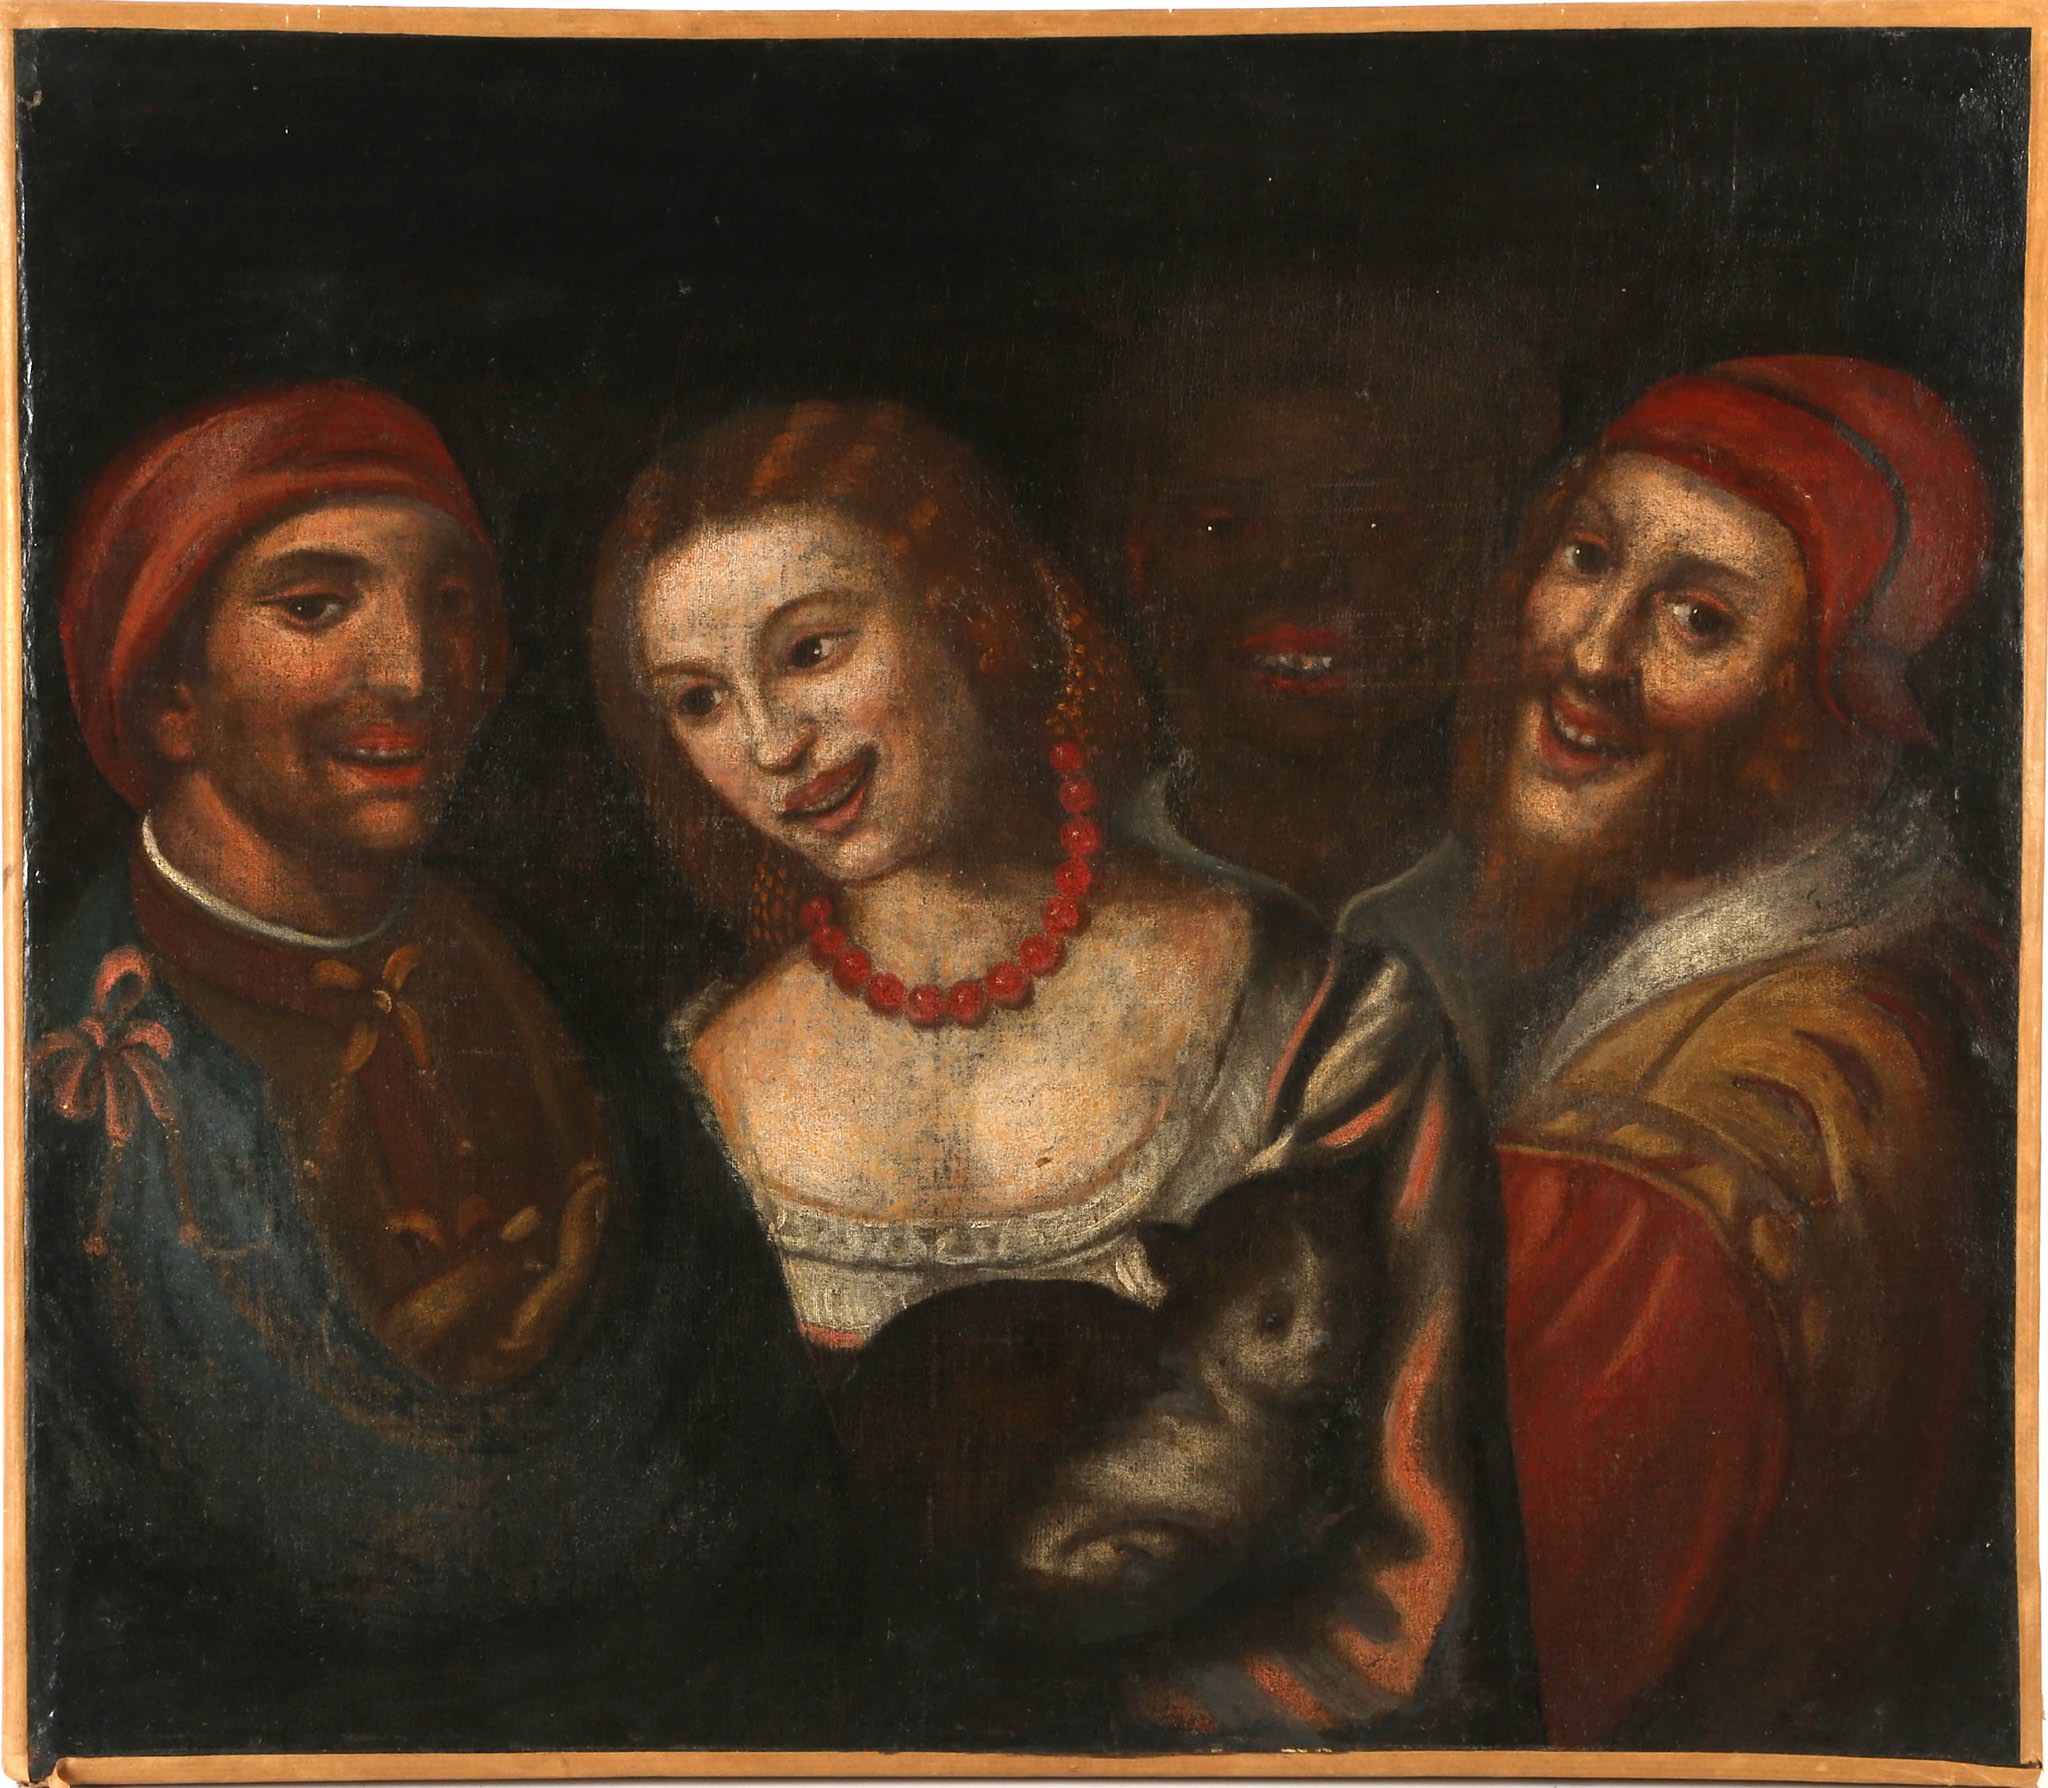 17th century Italian School, possibly Venetian, 'The Revellers', oil on canvas. A courtesan, her